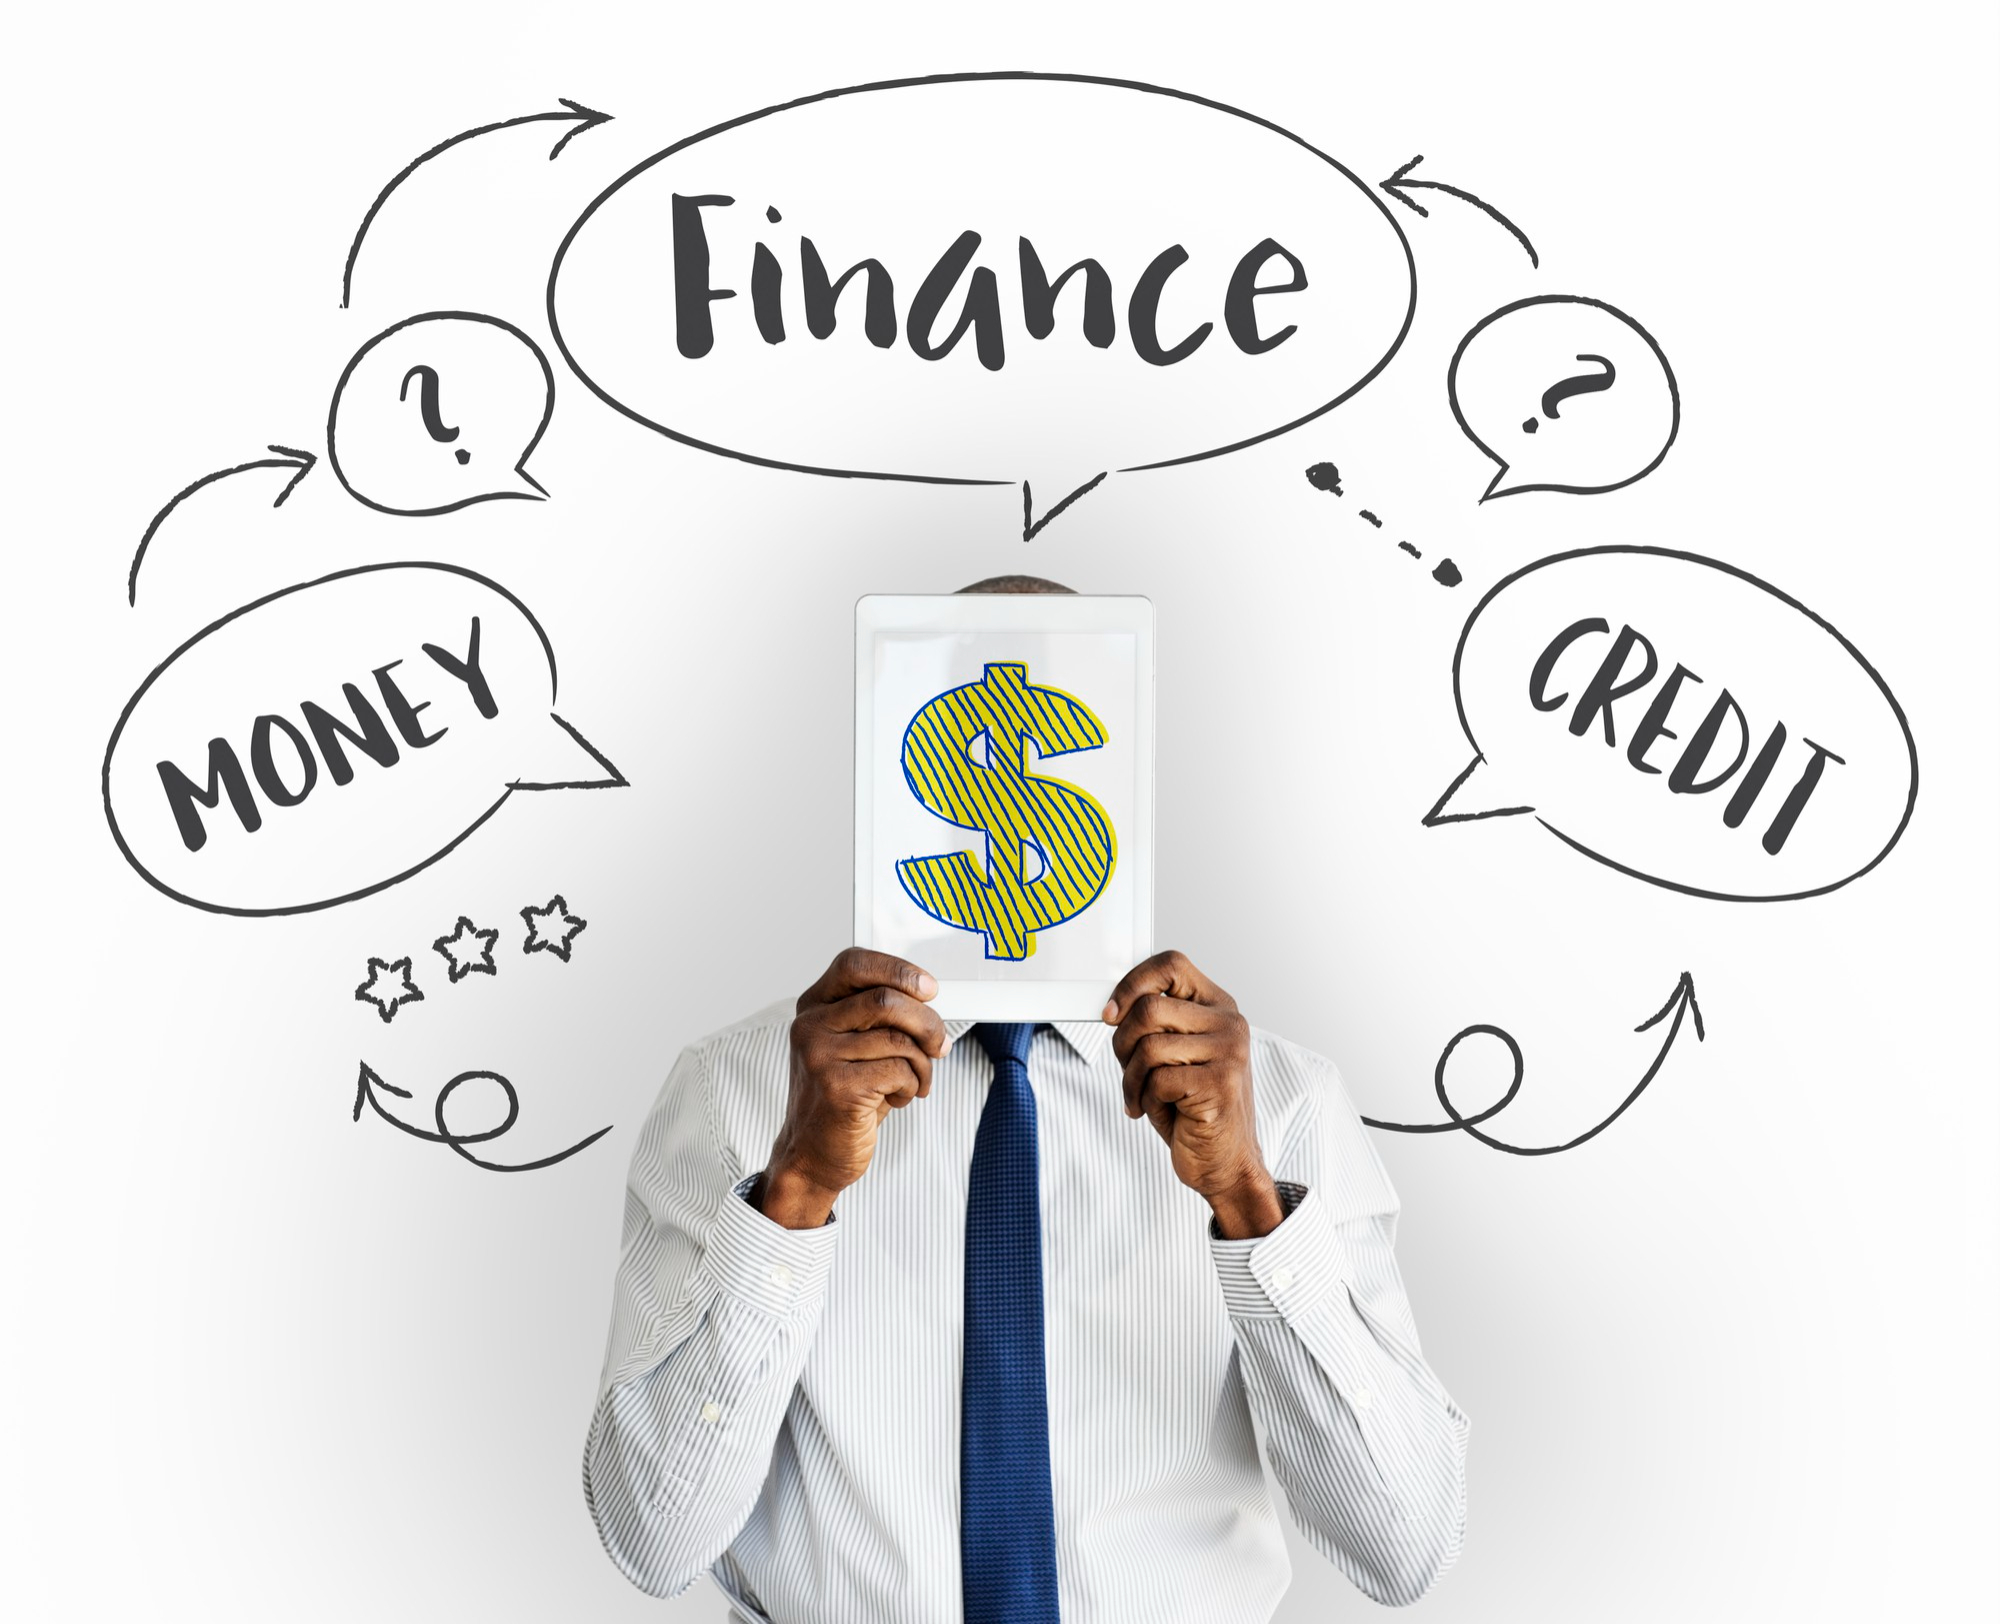 Top 5 Misleading Personal Finance Tips